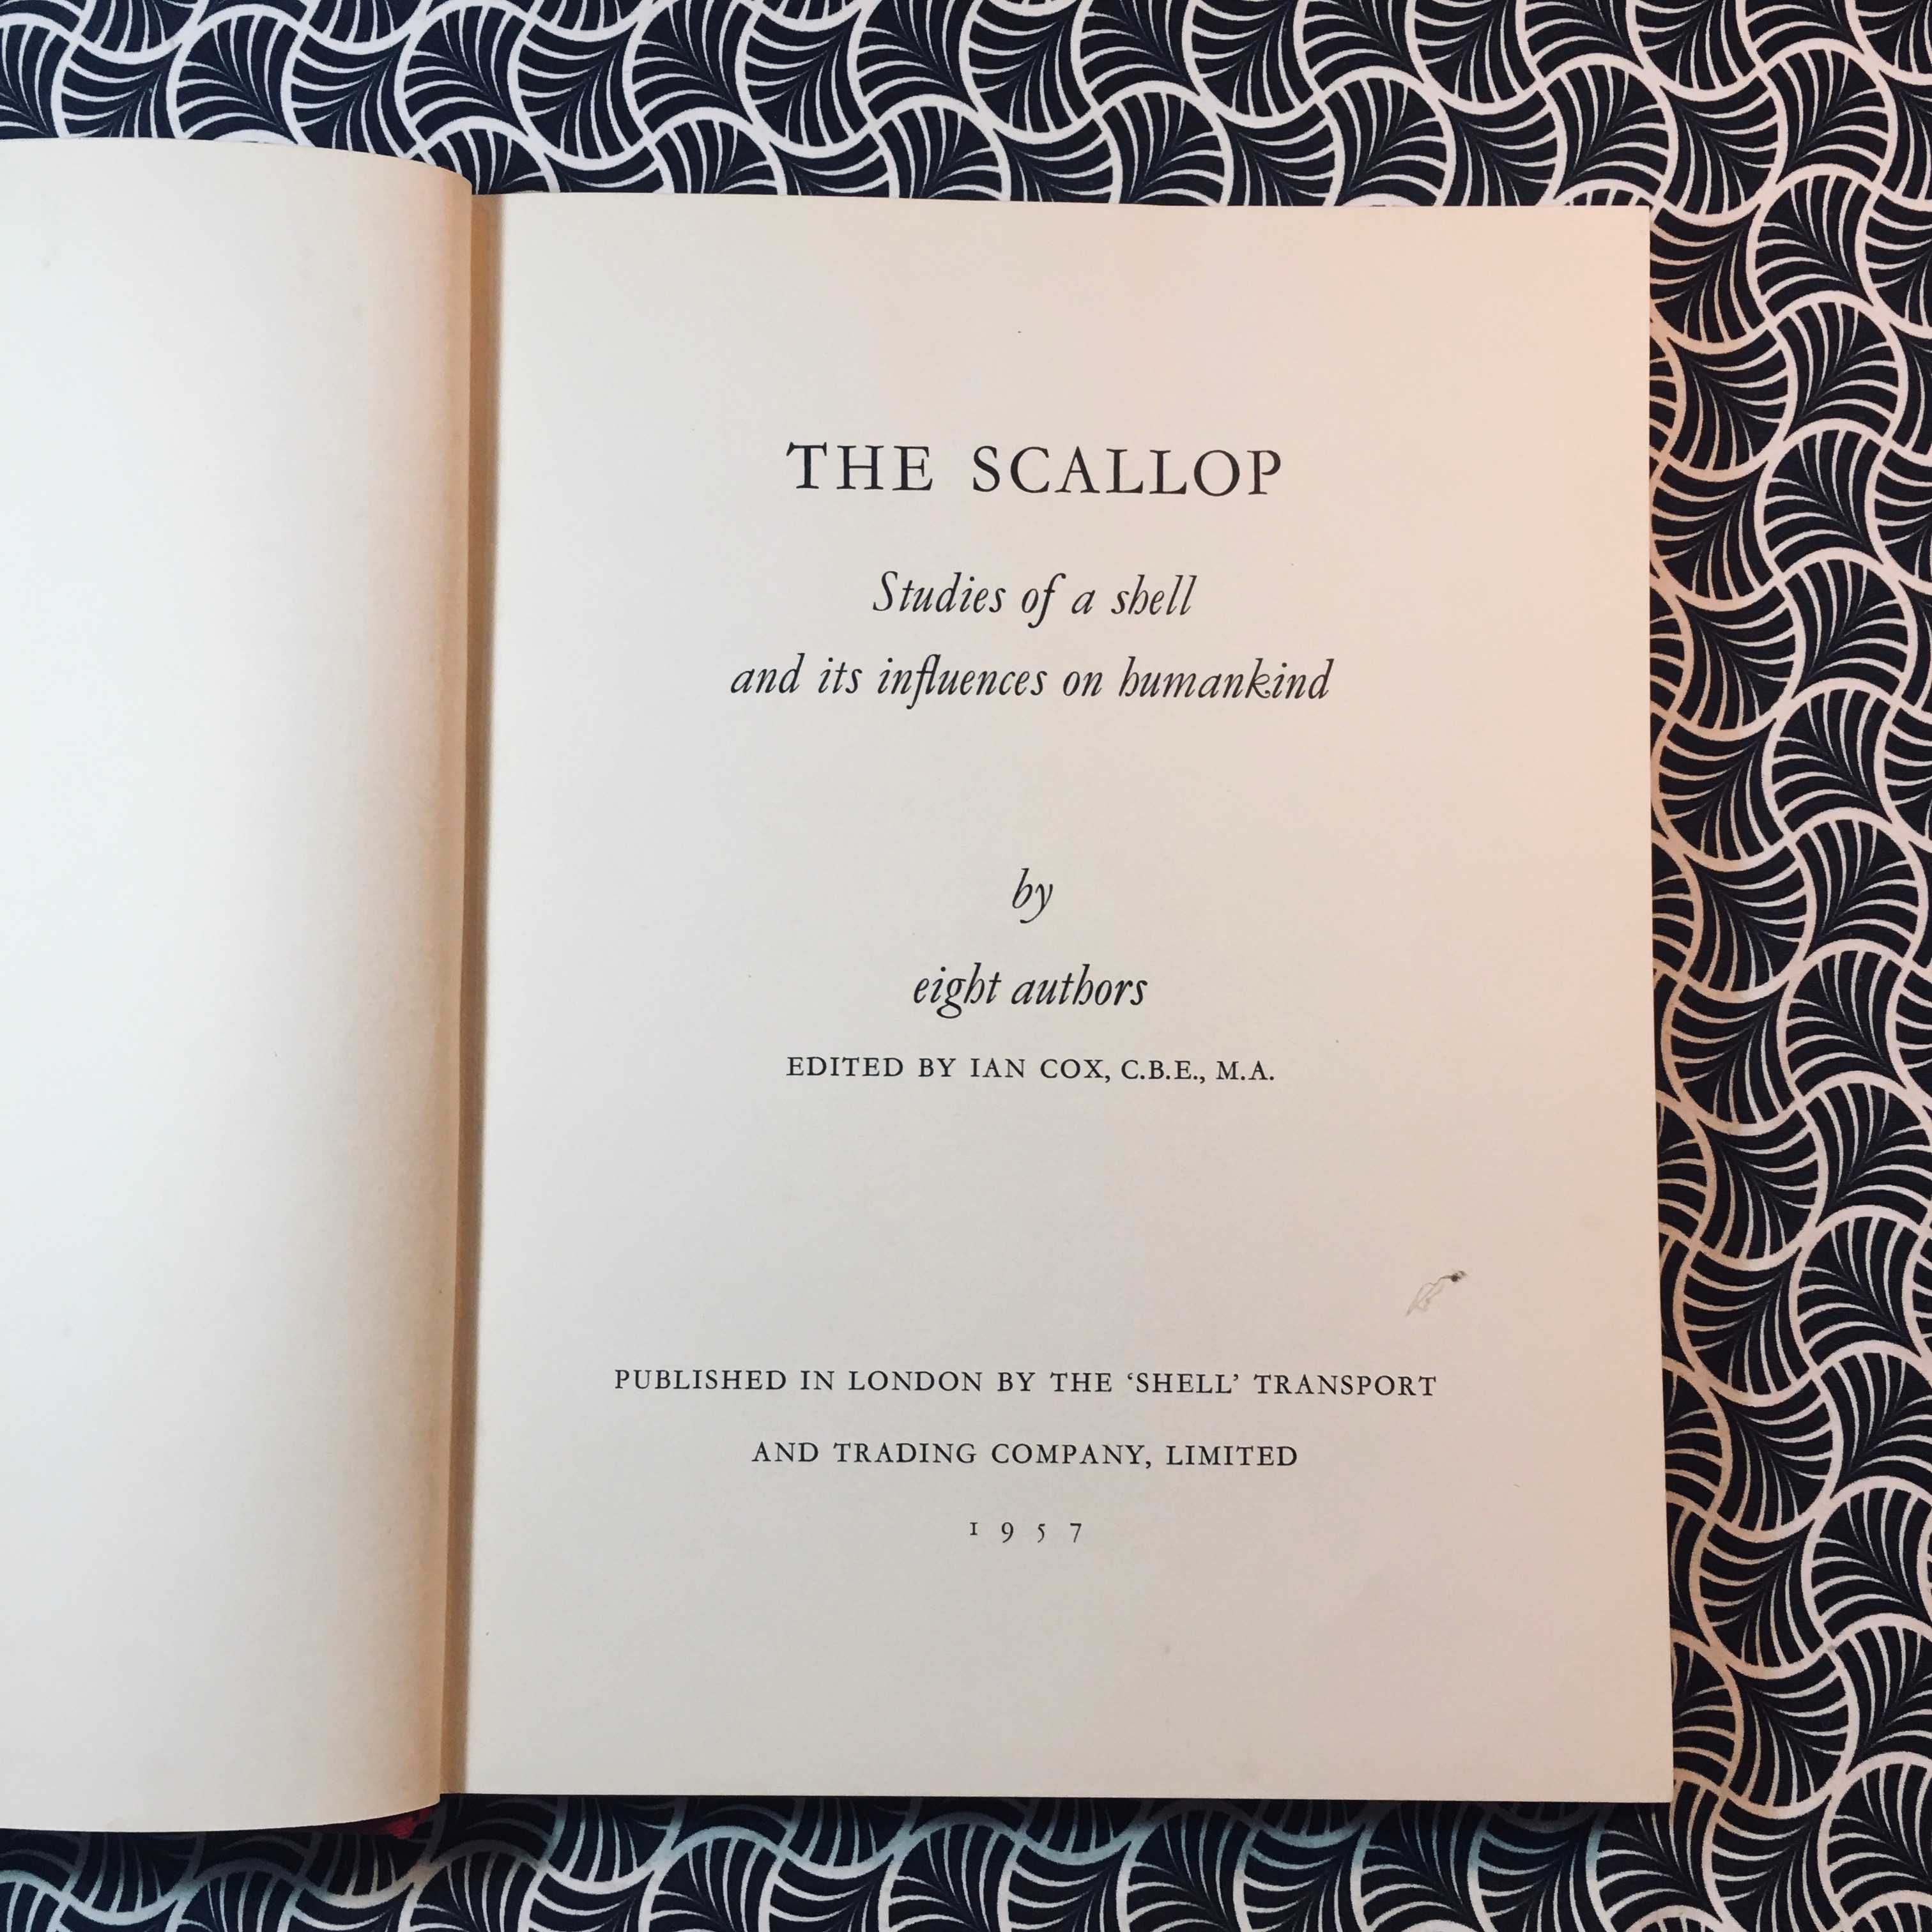 The Scallop: Studies of a Shell and its Influences on Humankind